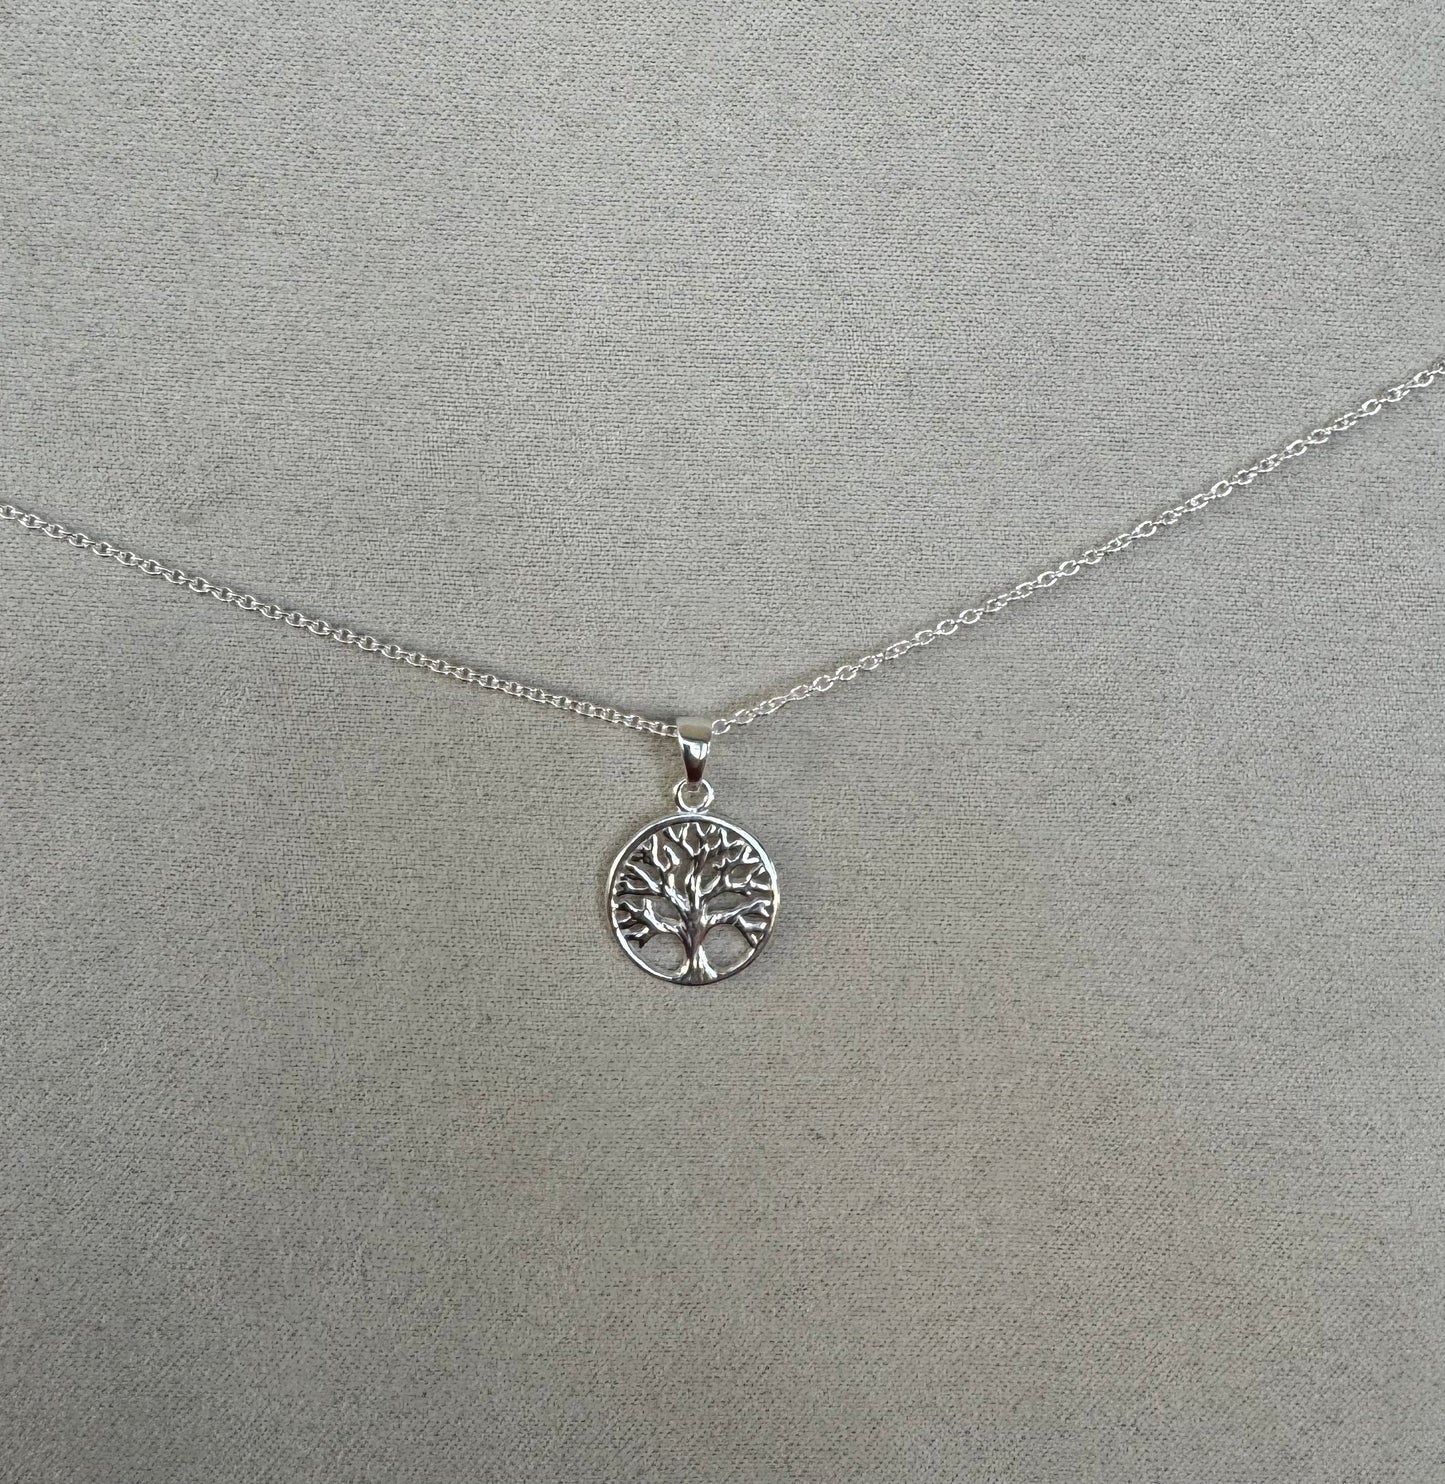 7. Tree of life necklace  solid sterling silver 
Your choice of 16 or 18 inch chain (please put in the notes section)
$30 

Have 5